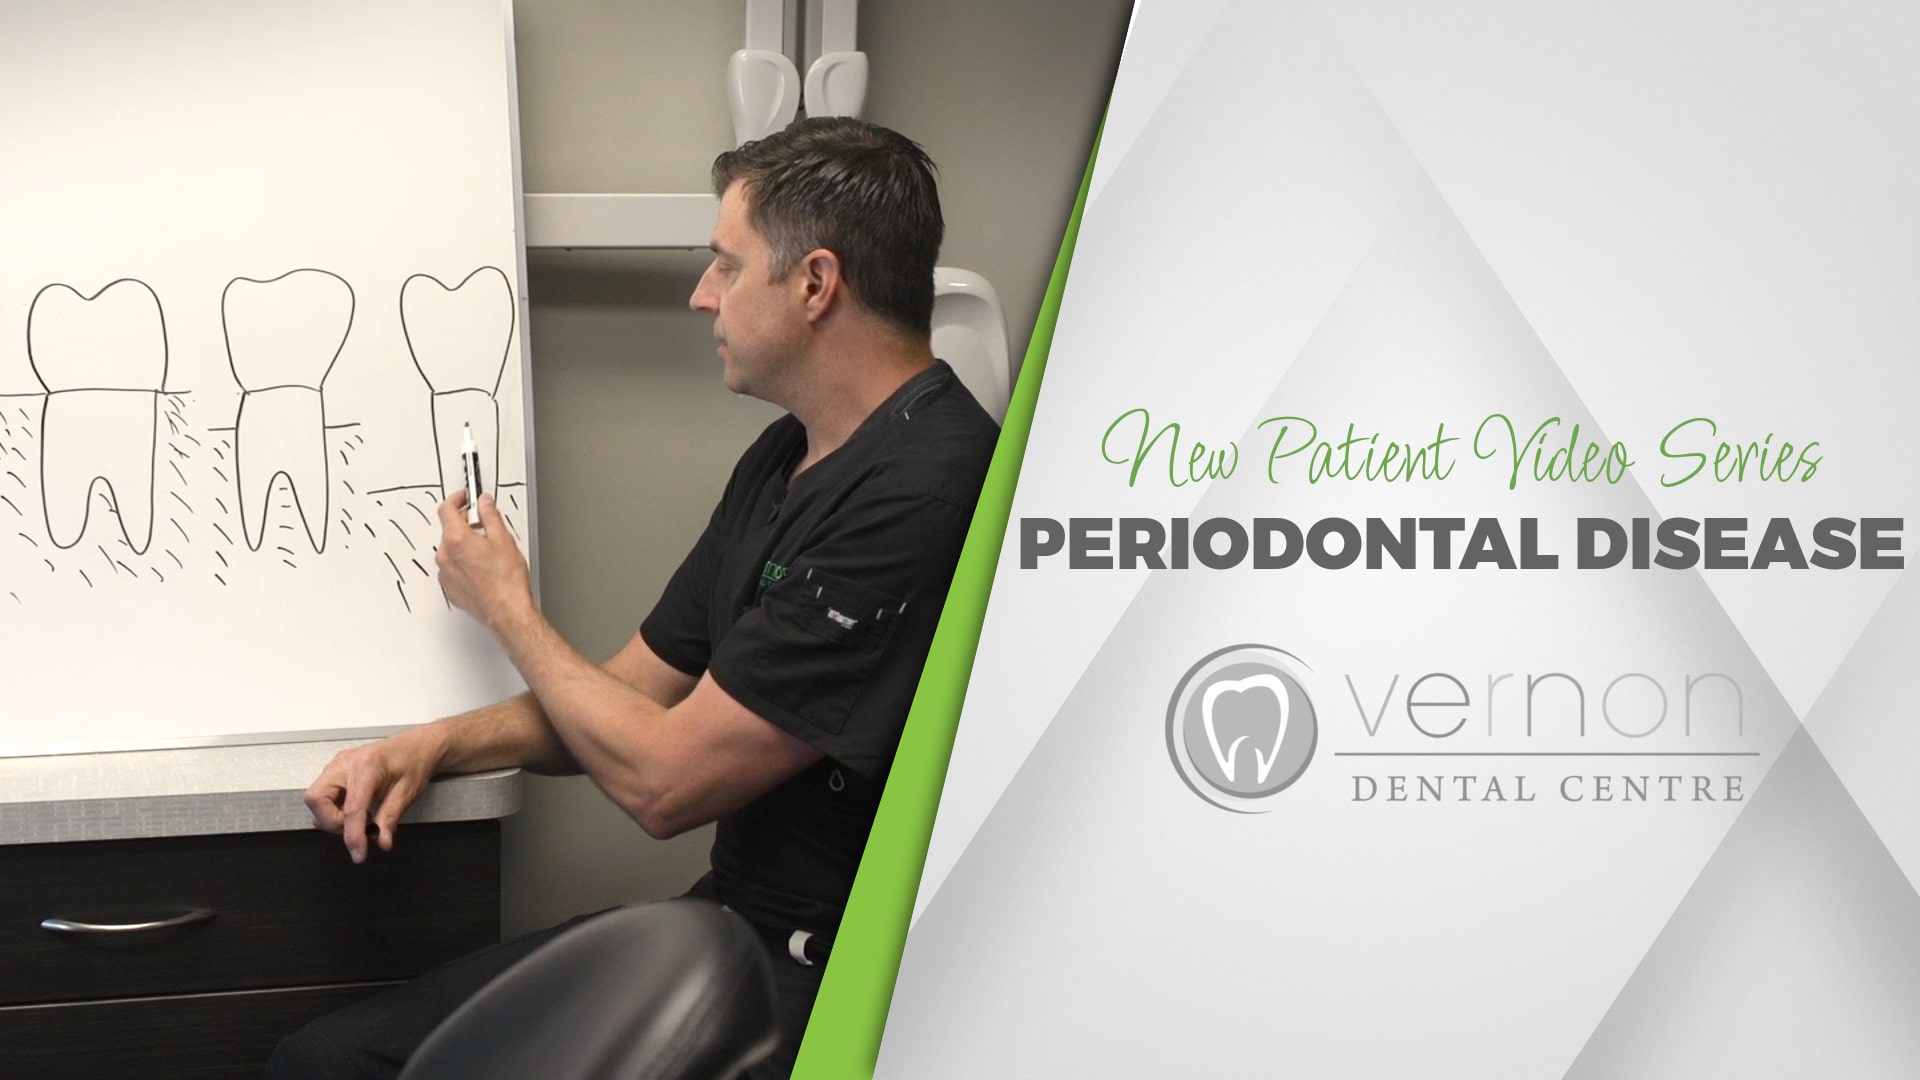 Dr. Anthony Berdan from Vernon Dental Centre discusses periodontal disease.